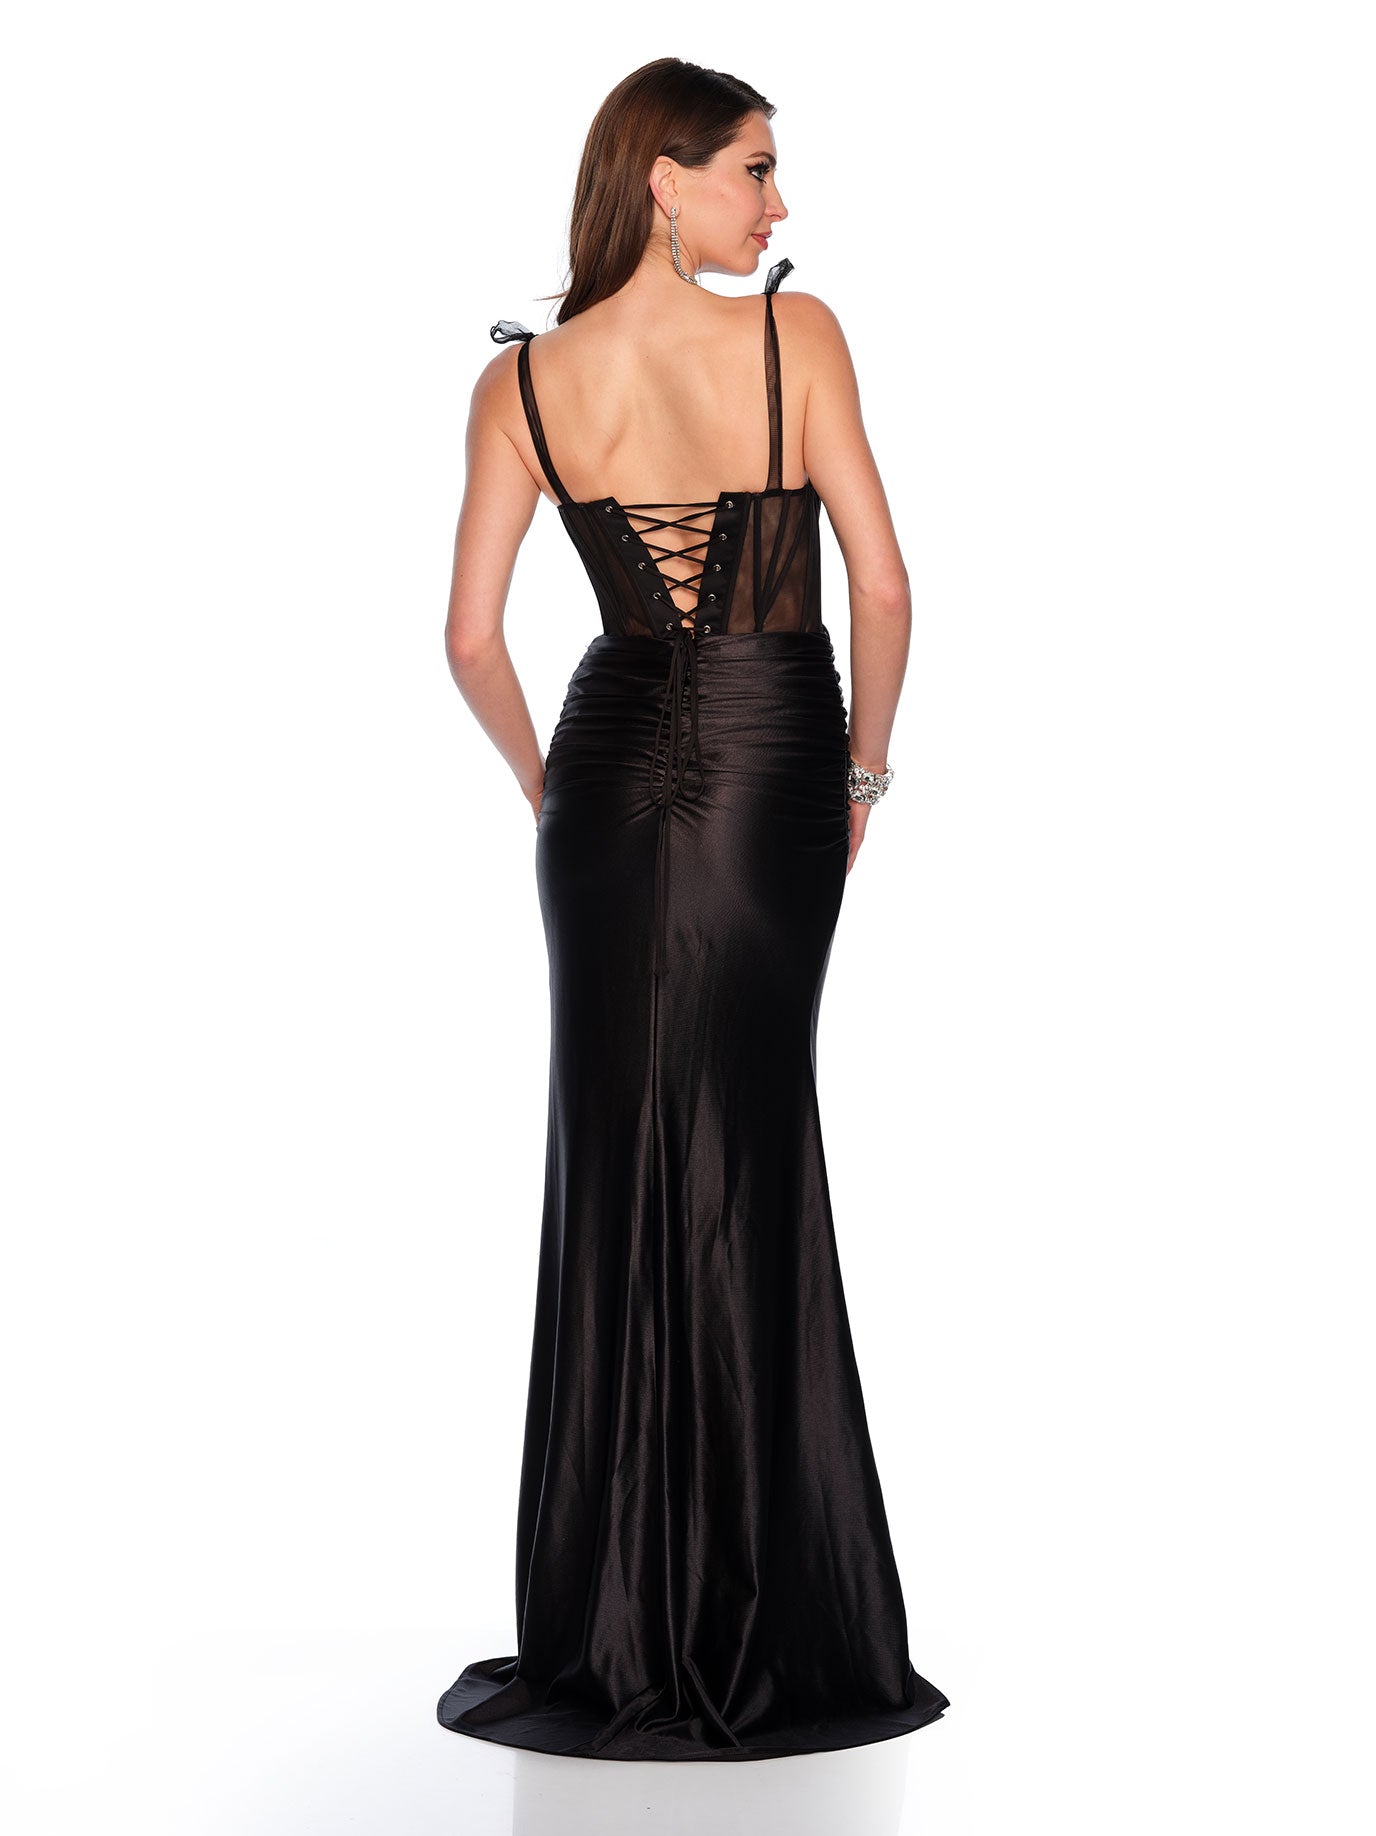 SHEER CORSET FITTED JERSEY GOWN